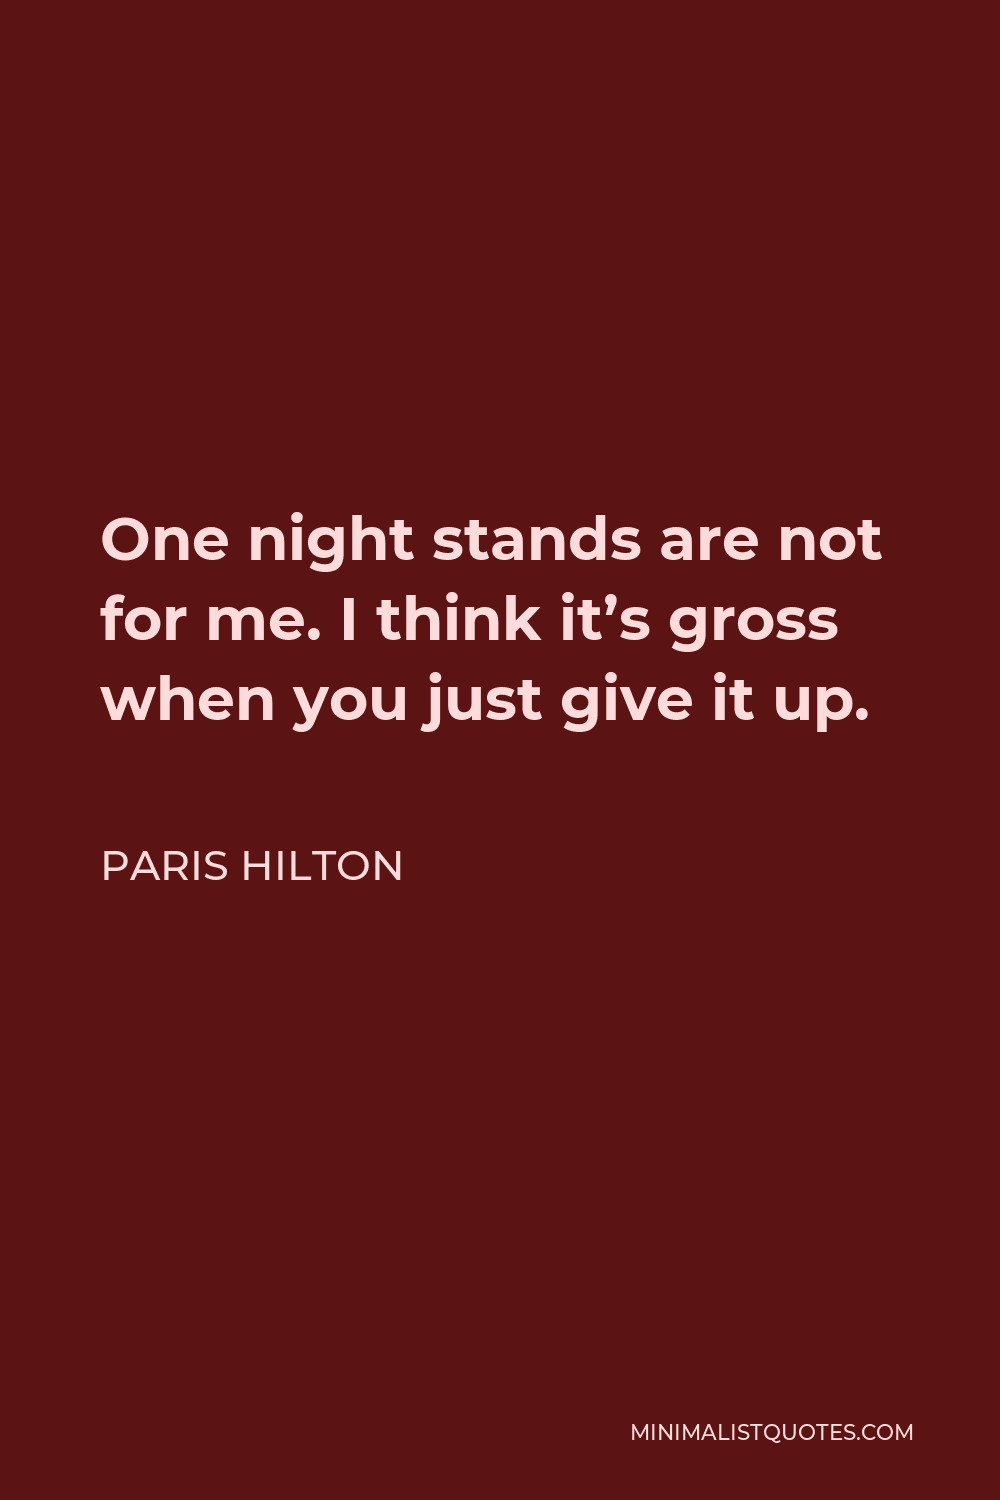 Paris Hilton Quote - One night stands are not for me. I think it’s gross when you just give it up.